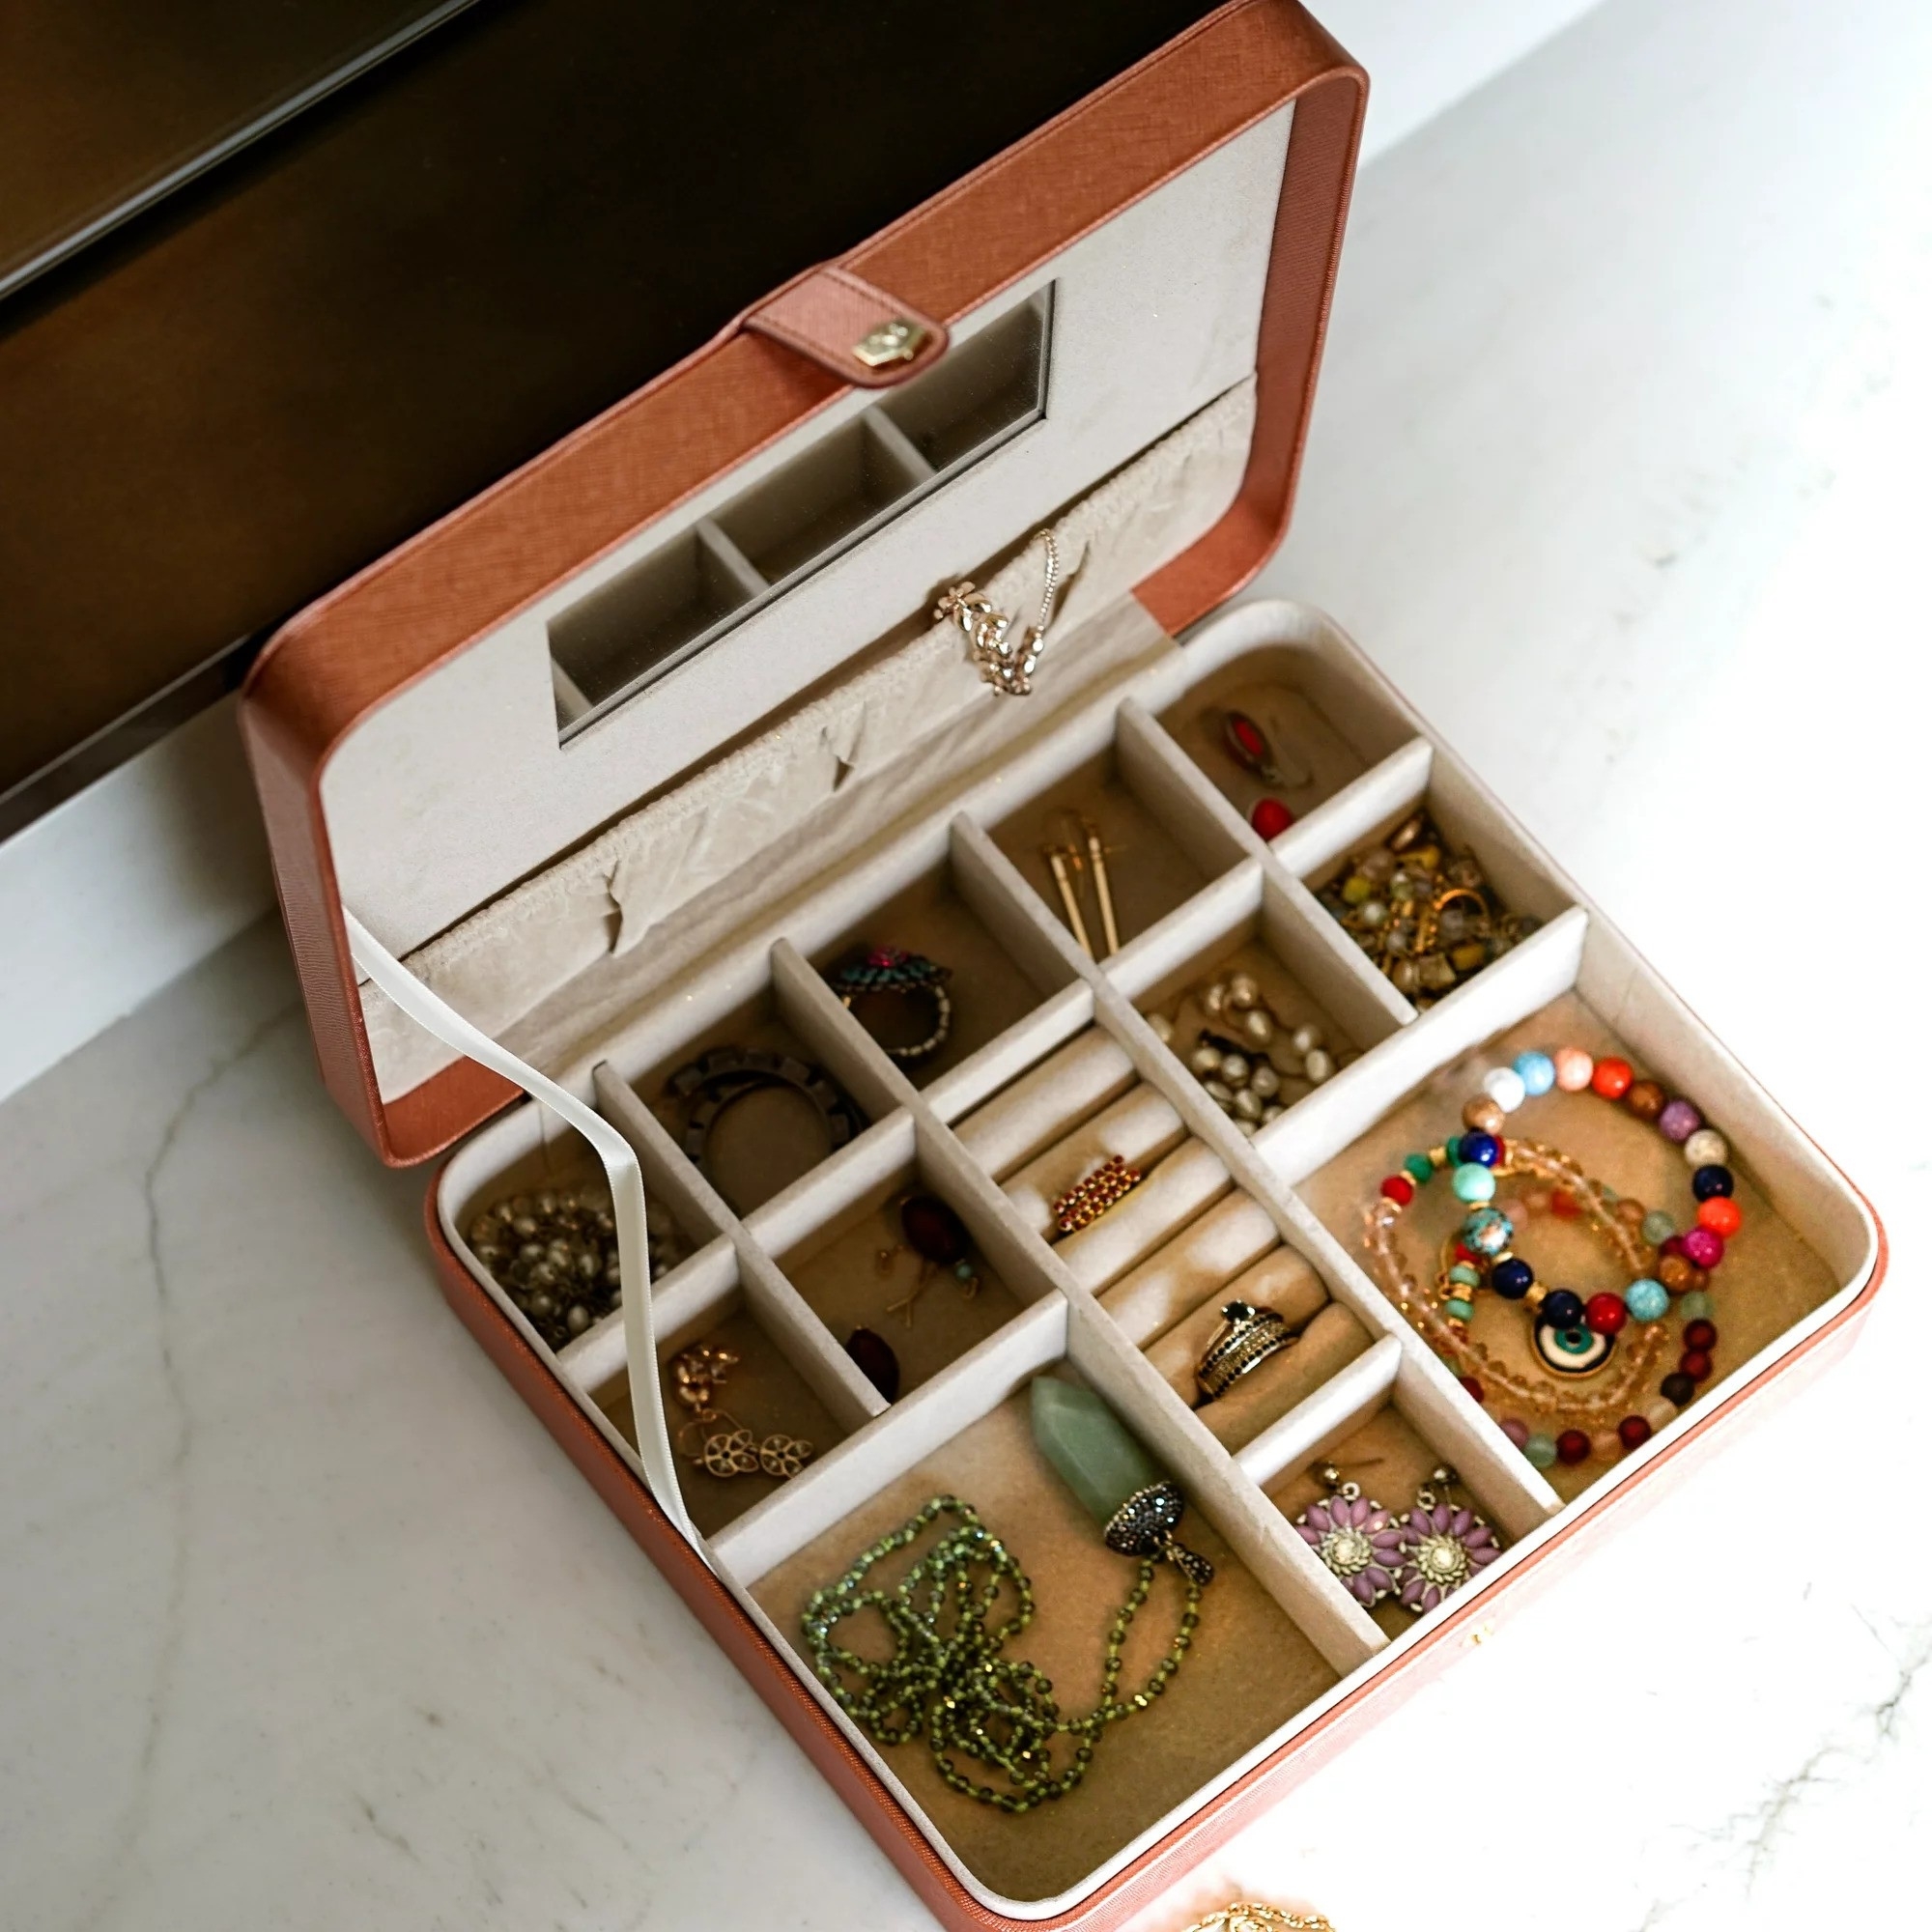 Open jewelry box with various compartments containing necklaces, bracelets, and earrings